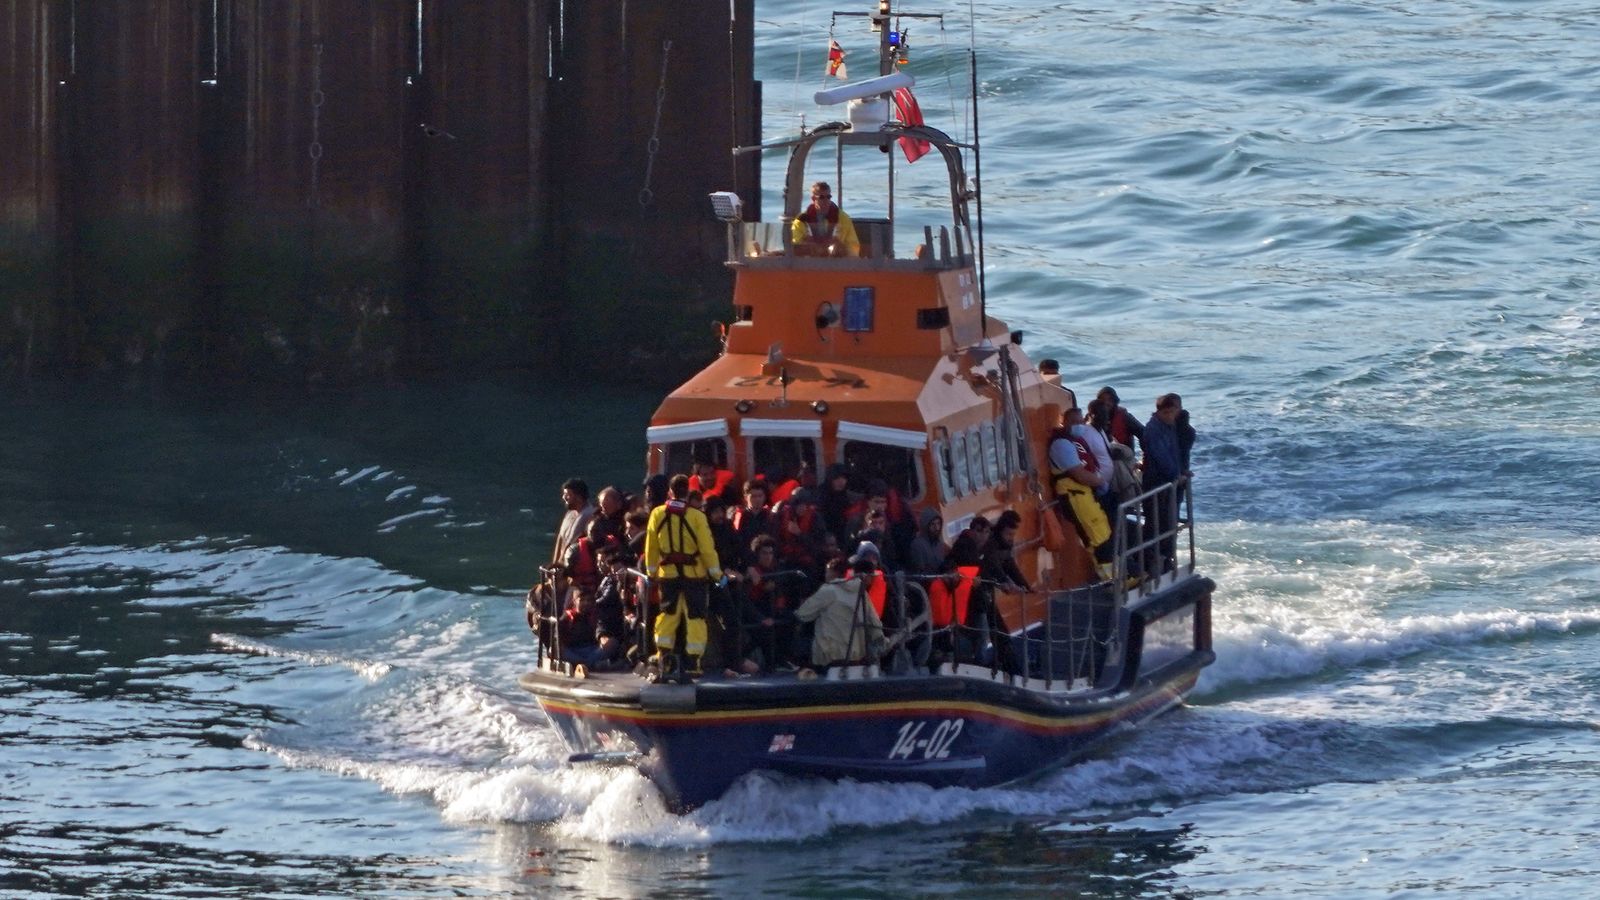 Over 100,000 people now likely to have crossed Channel in small boats since records began